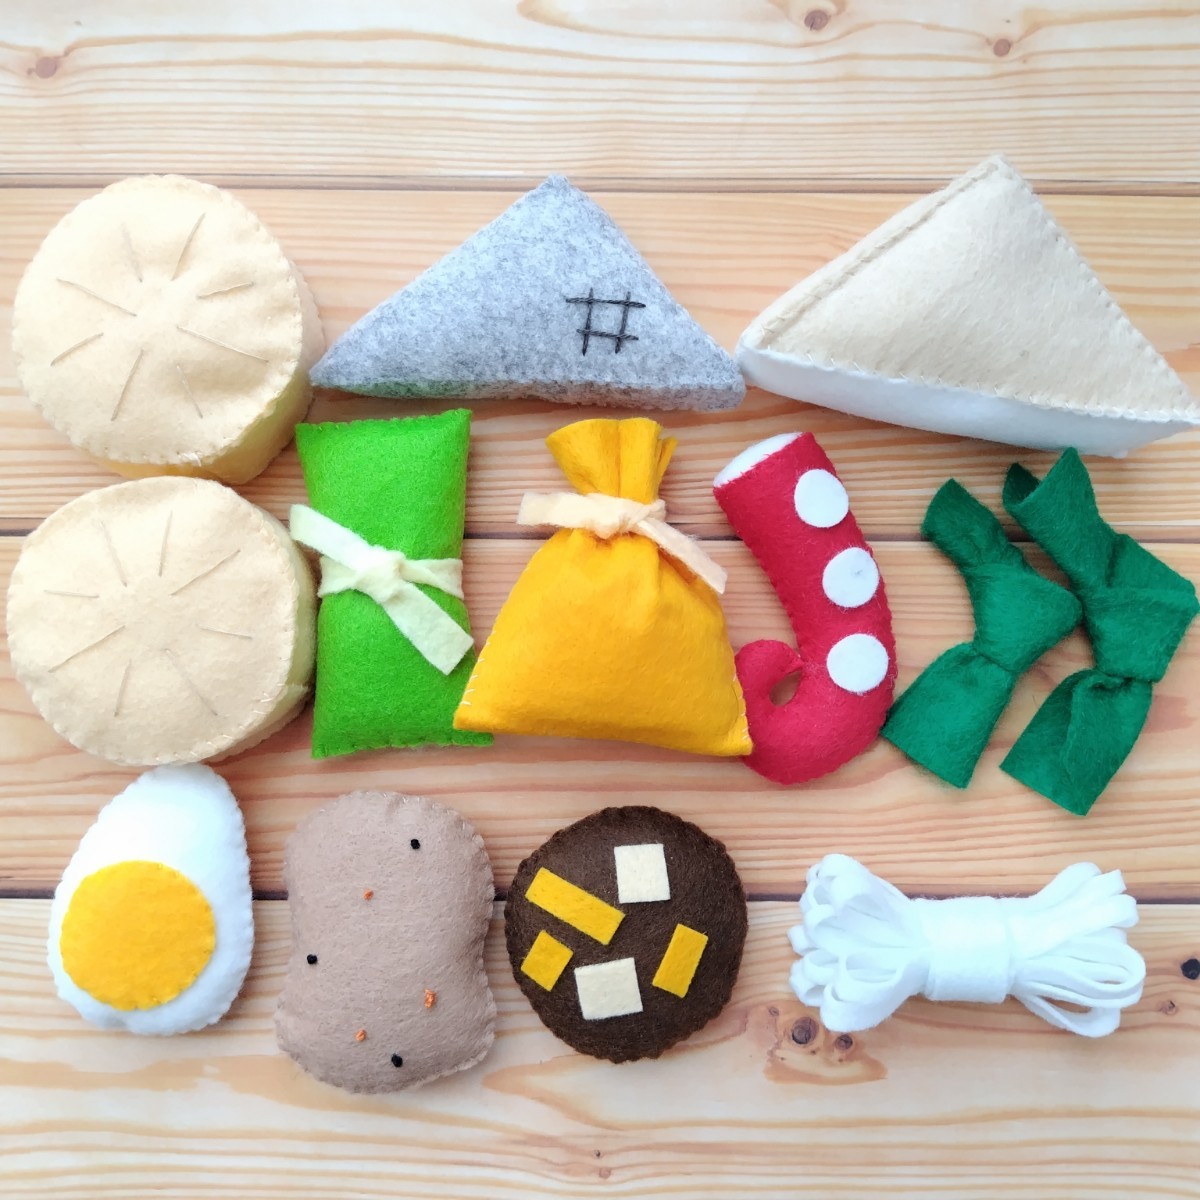  another another oden!13 piece set hand made felt ... toy intellectual training child care food ... game toy present display 